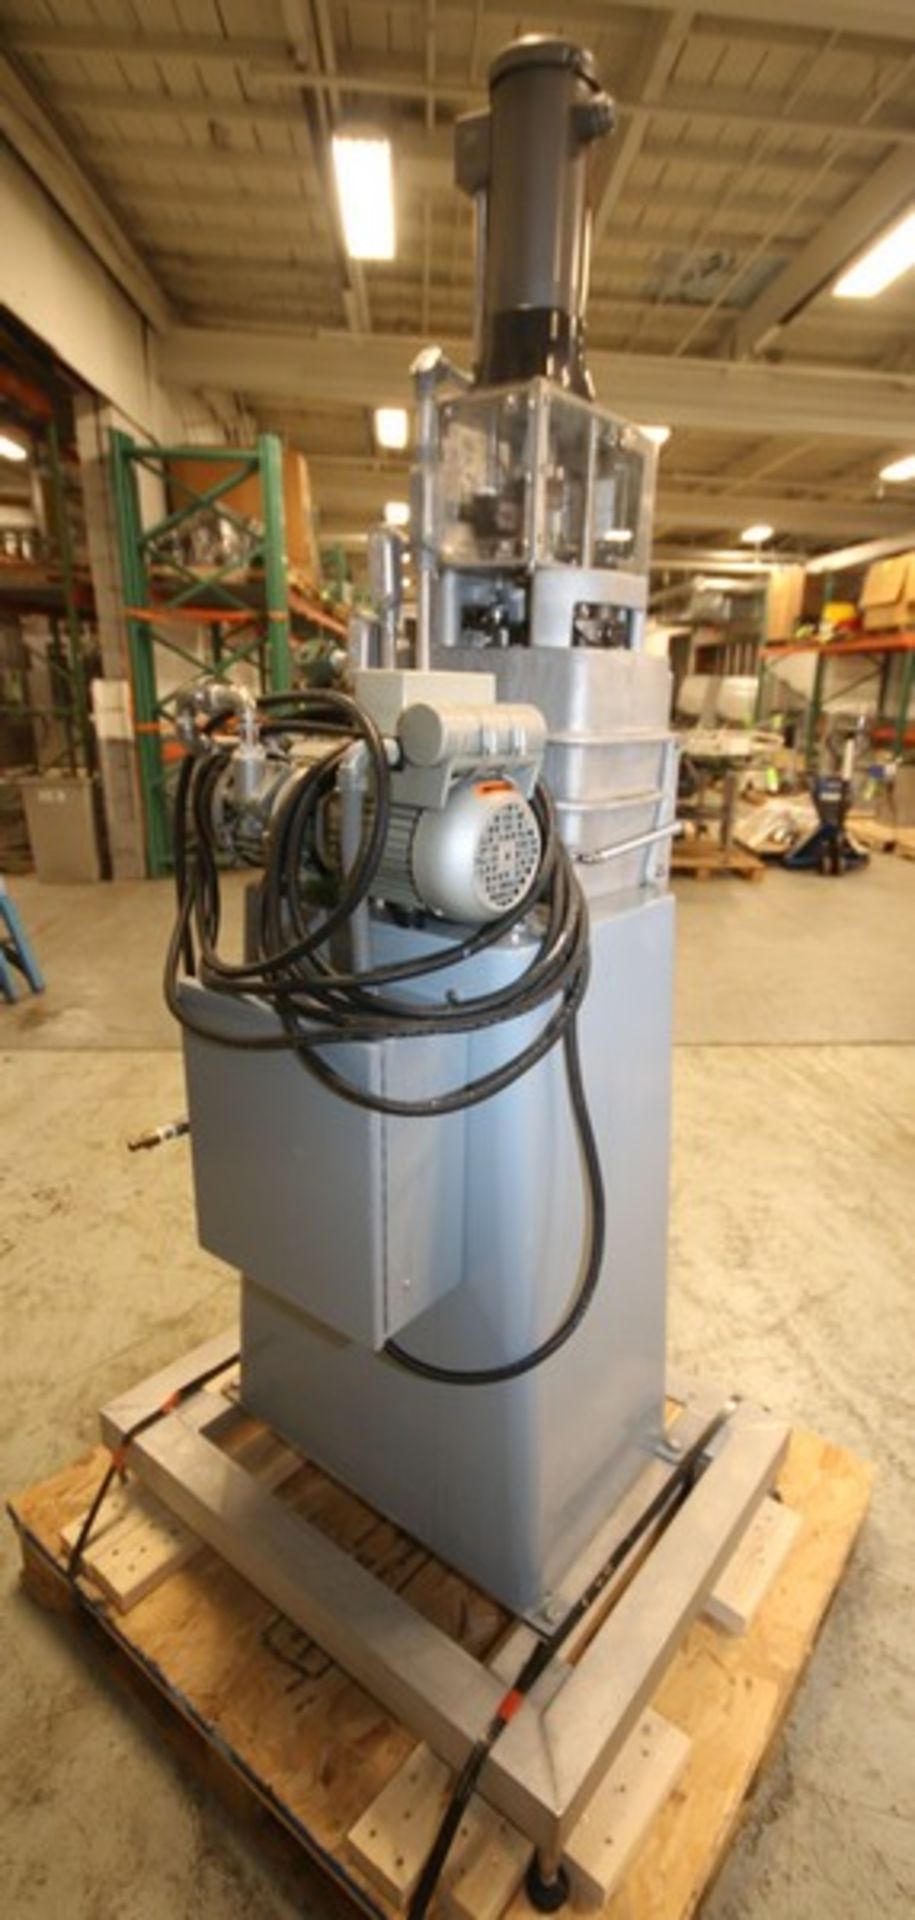 Dixie Double Can Seamer, Model UVGMD-ALCC, SN 95166, Busch On Board Vacuum Pump, 110/115V, Idec - Image 10 of 14